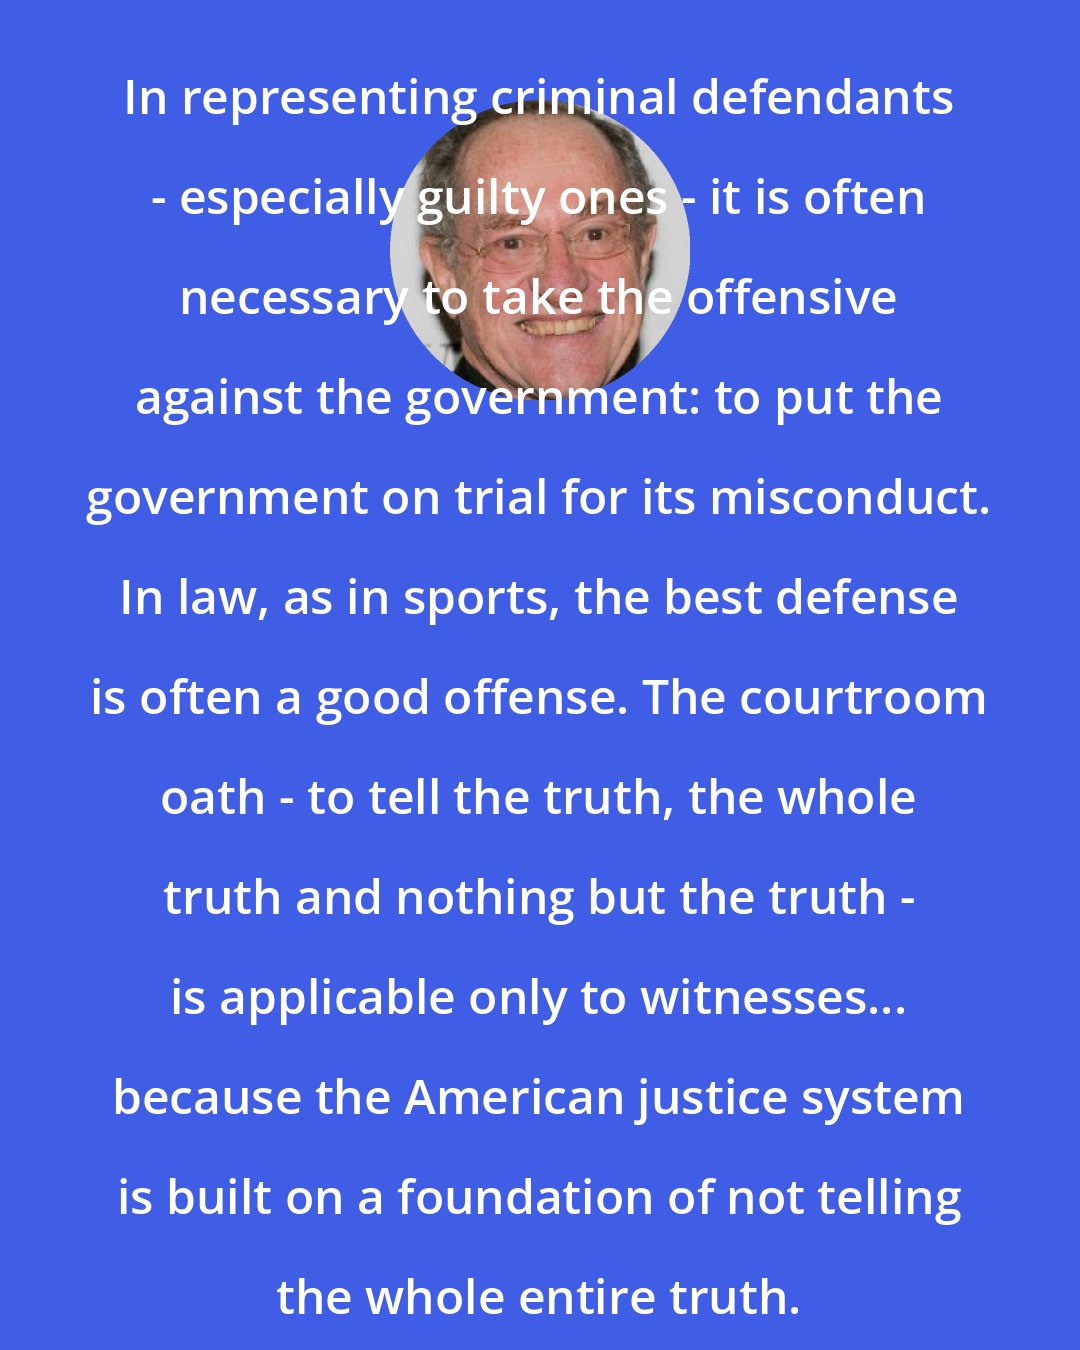 Alan Dershowitz: In representing criminal defendants - especially guilty ones - it is often necessary to take the offensive against the government: to put the government on trial for its misconduct. In law, as in sports, the best defense is often a good offense. The courtroom oath - to tell the truth, the whole truth and nothing but the truth - is applicable only to witnesses... because the American justice system is built on a foundation of not telling the whole entire truth.